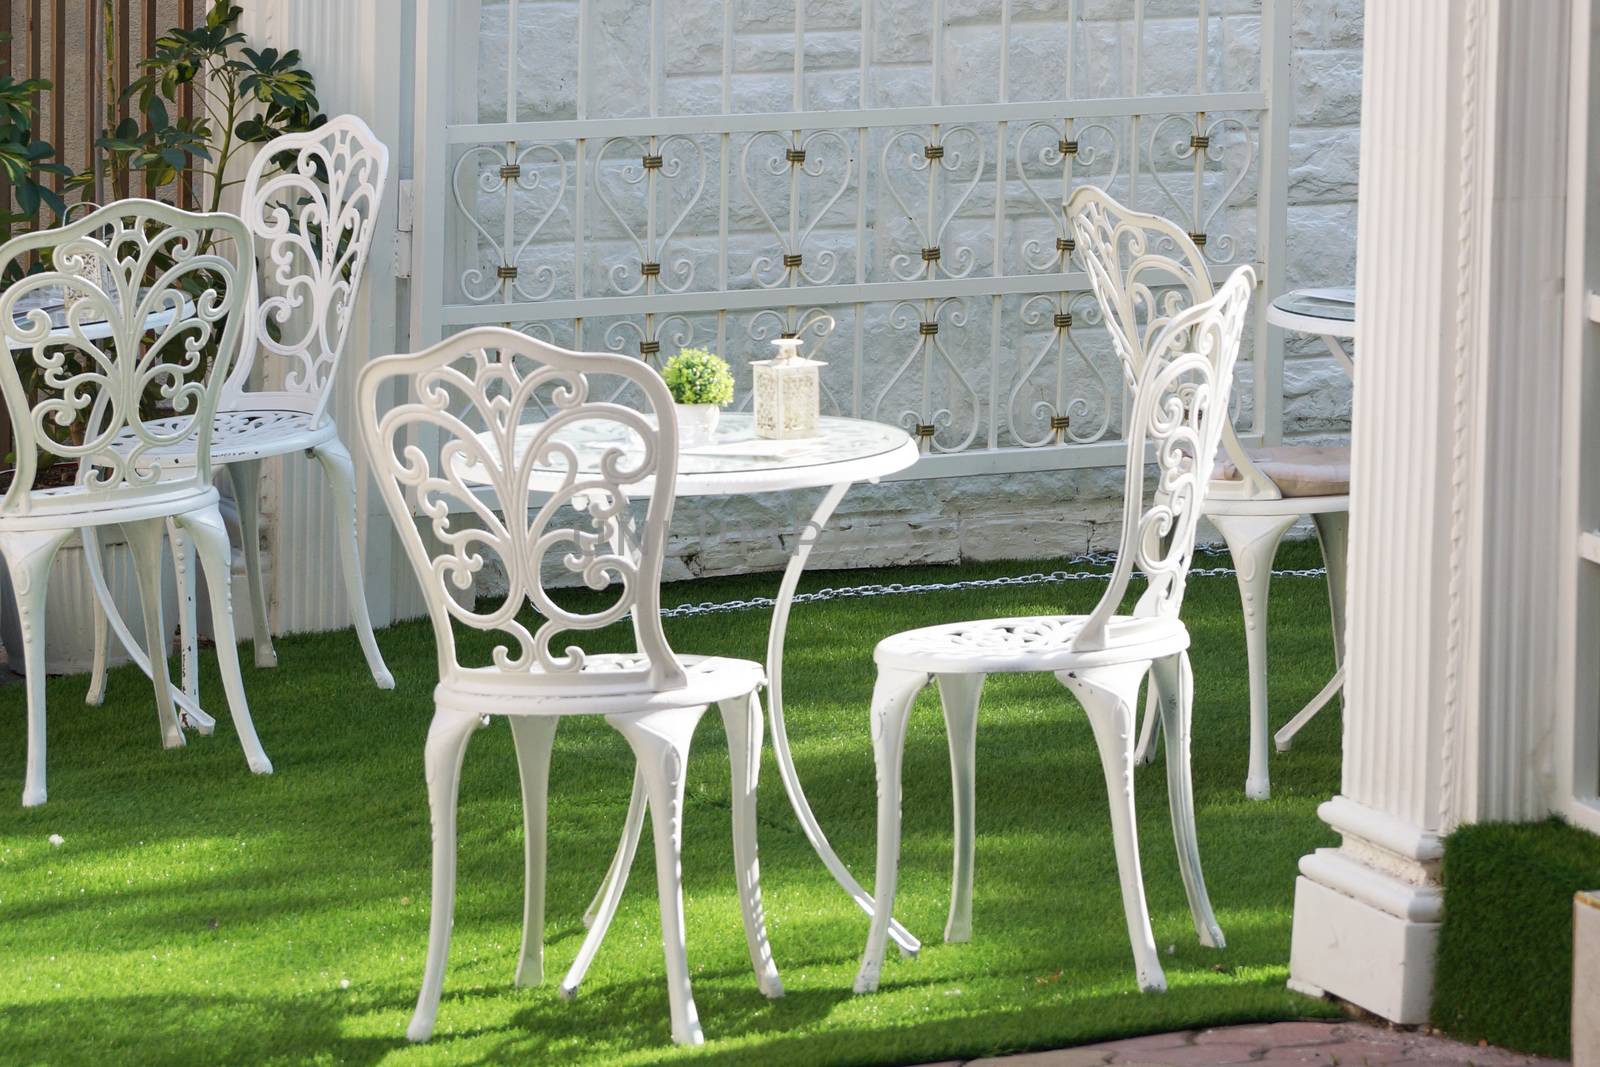 openwork white metal tables and chairs on a green lawn